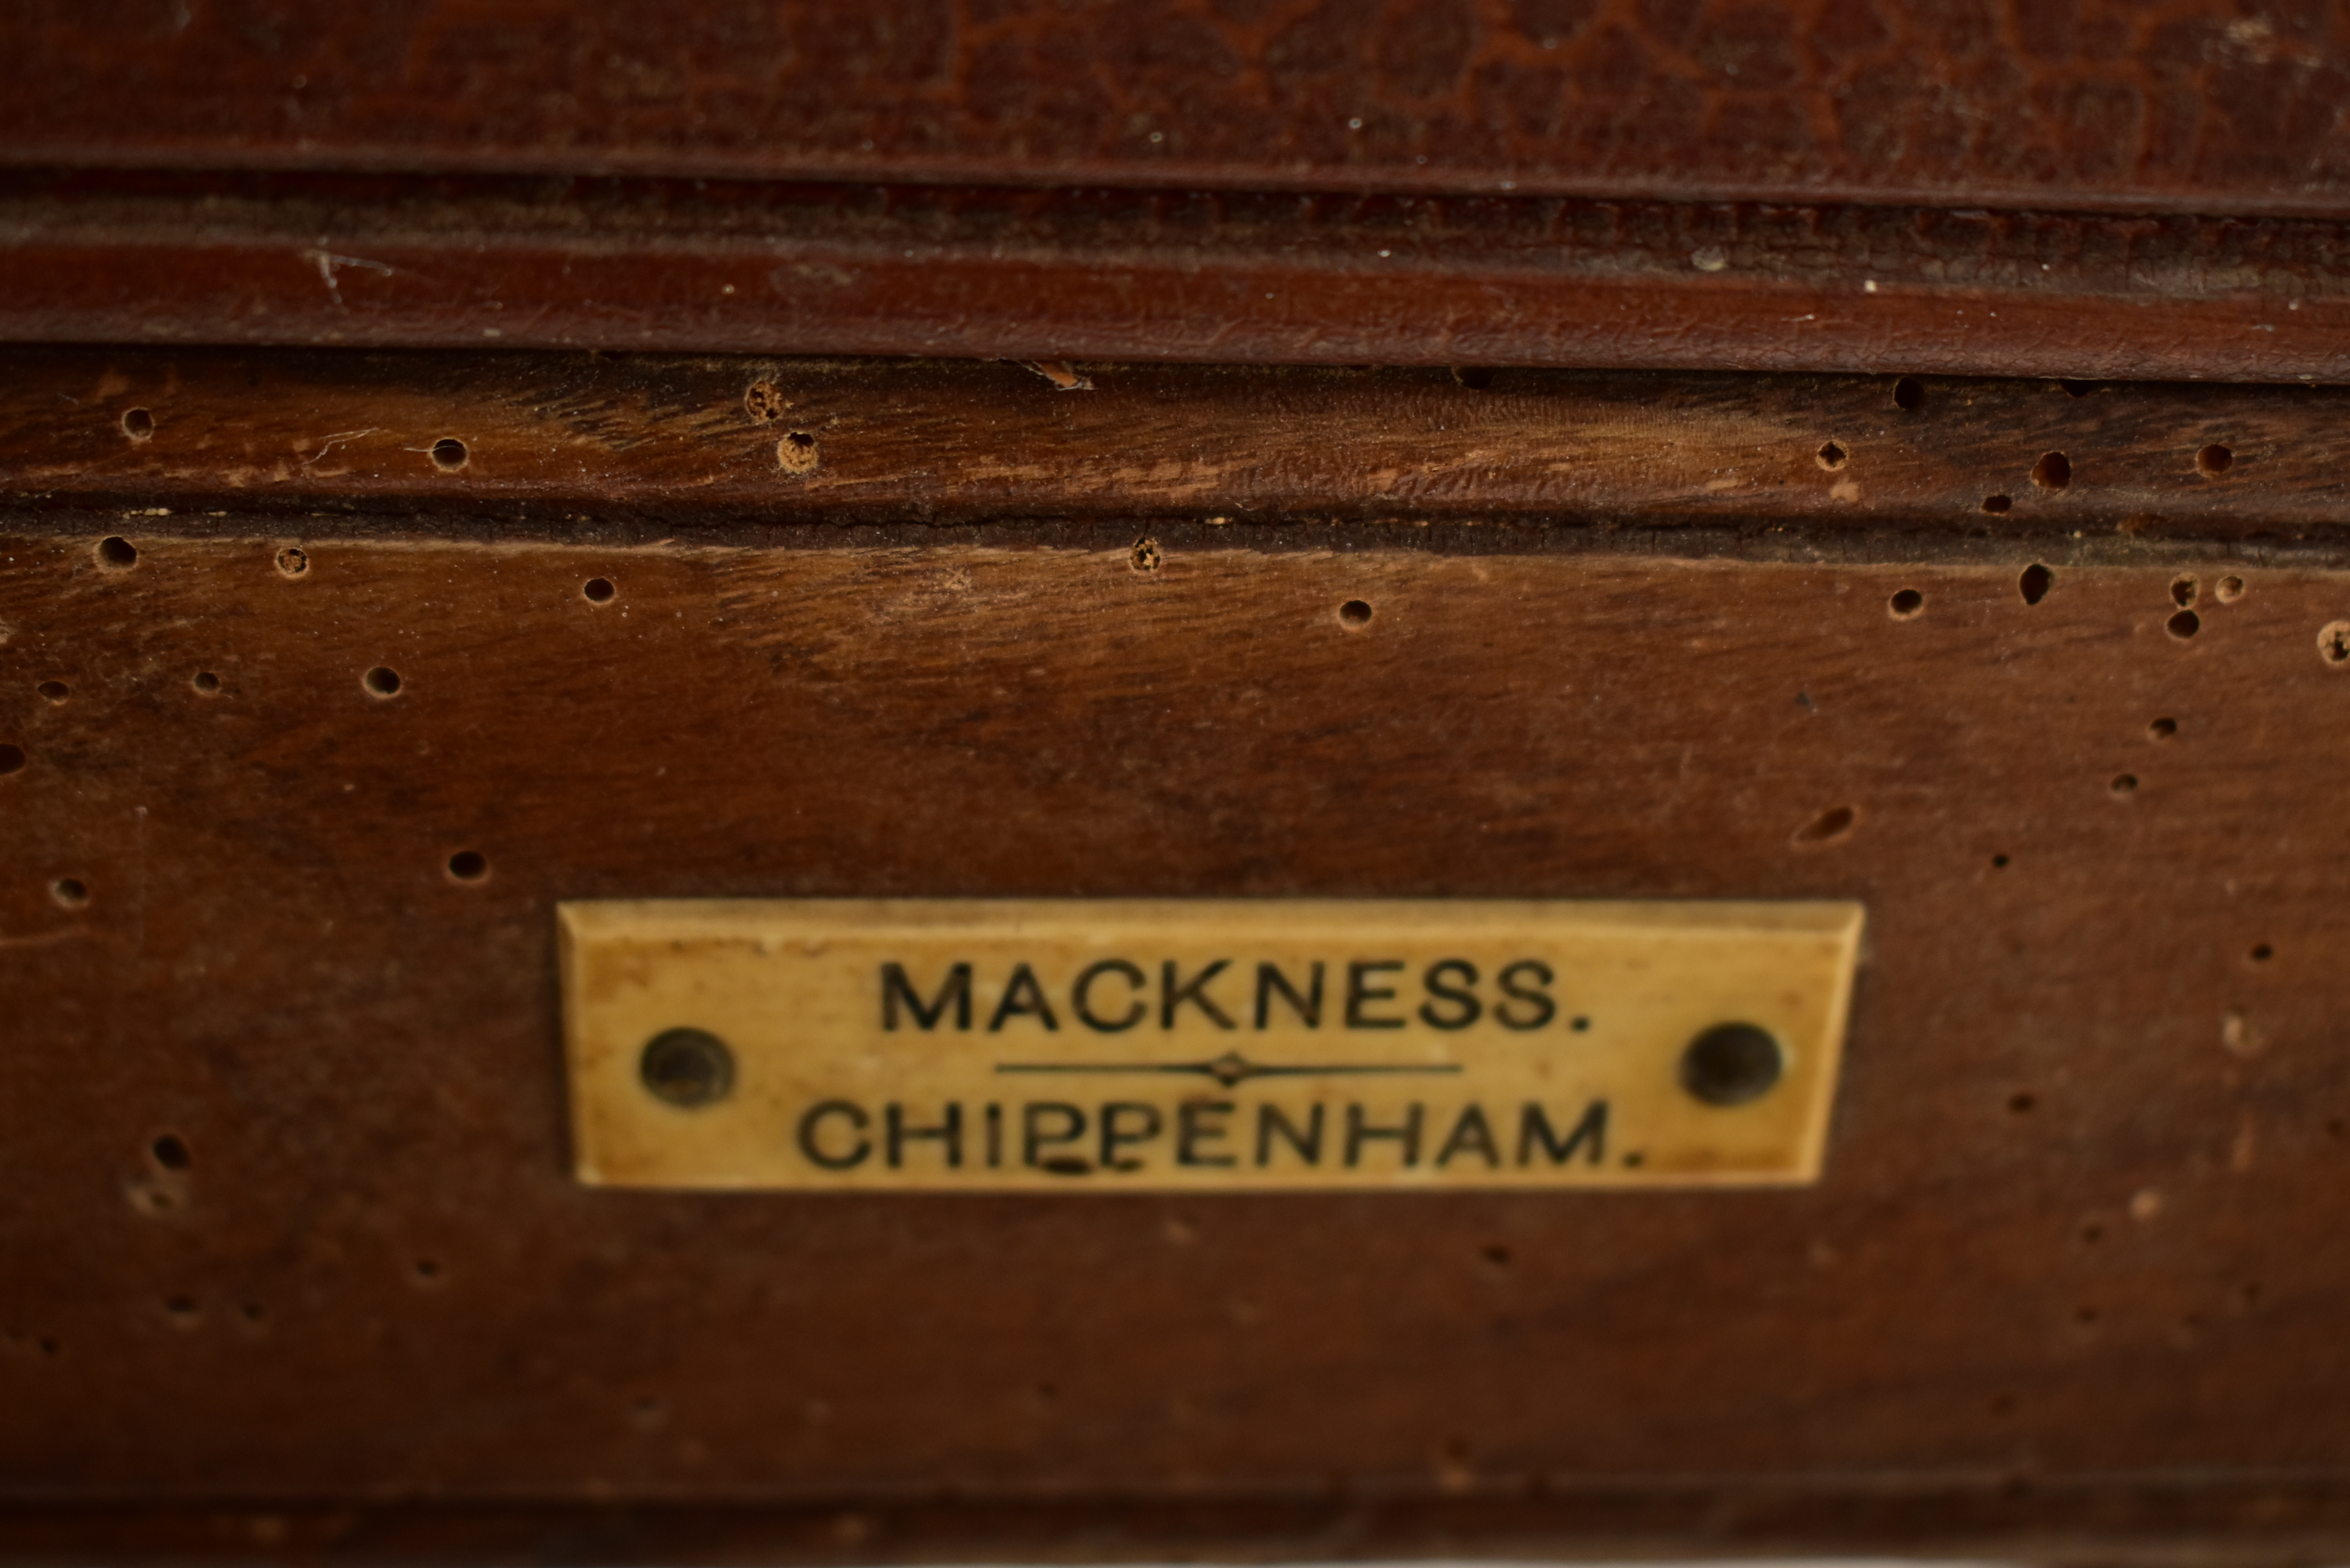 LATE 19TH CENTURY MACKNESS OF CHIPPENHAM BIER CARRIAGE - Image 3 of 5